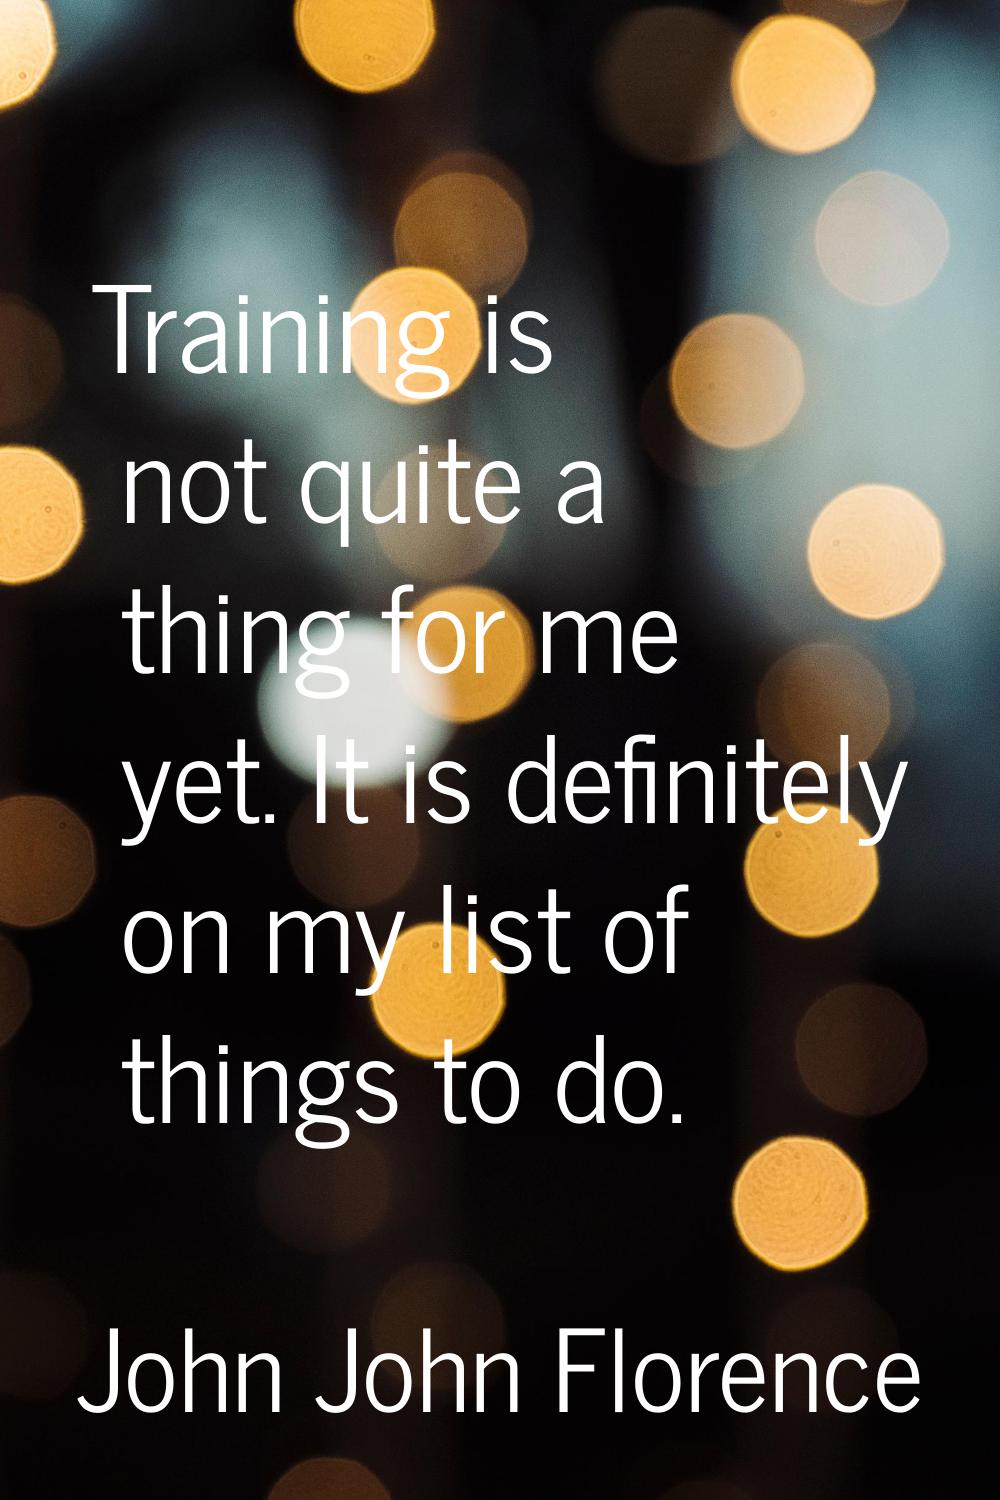 Training is not quite a thing for me yet. It is definitely on my list of things to do.